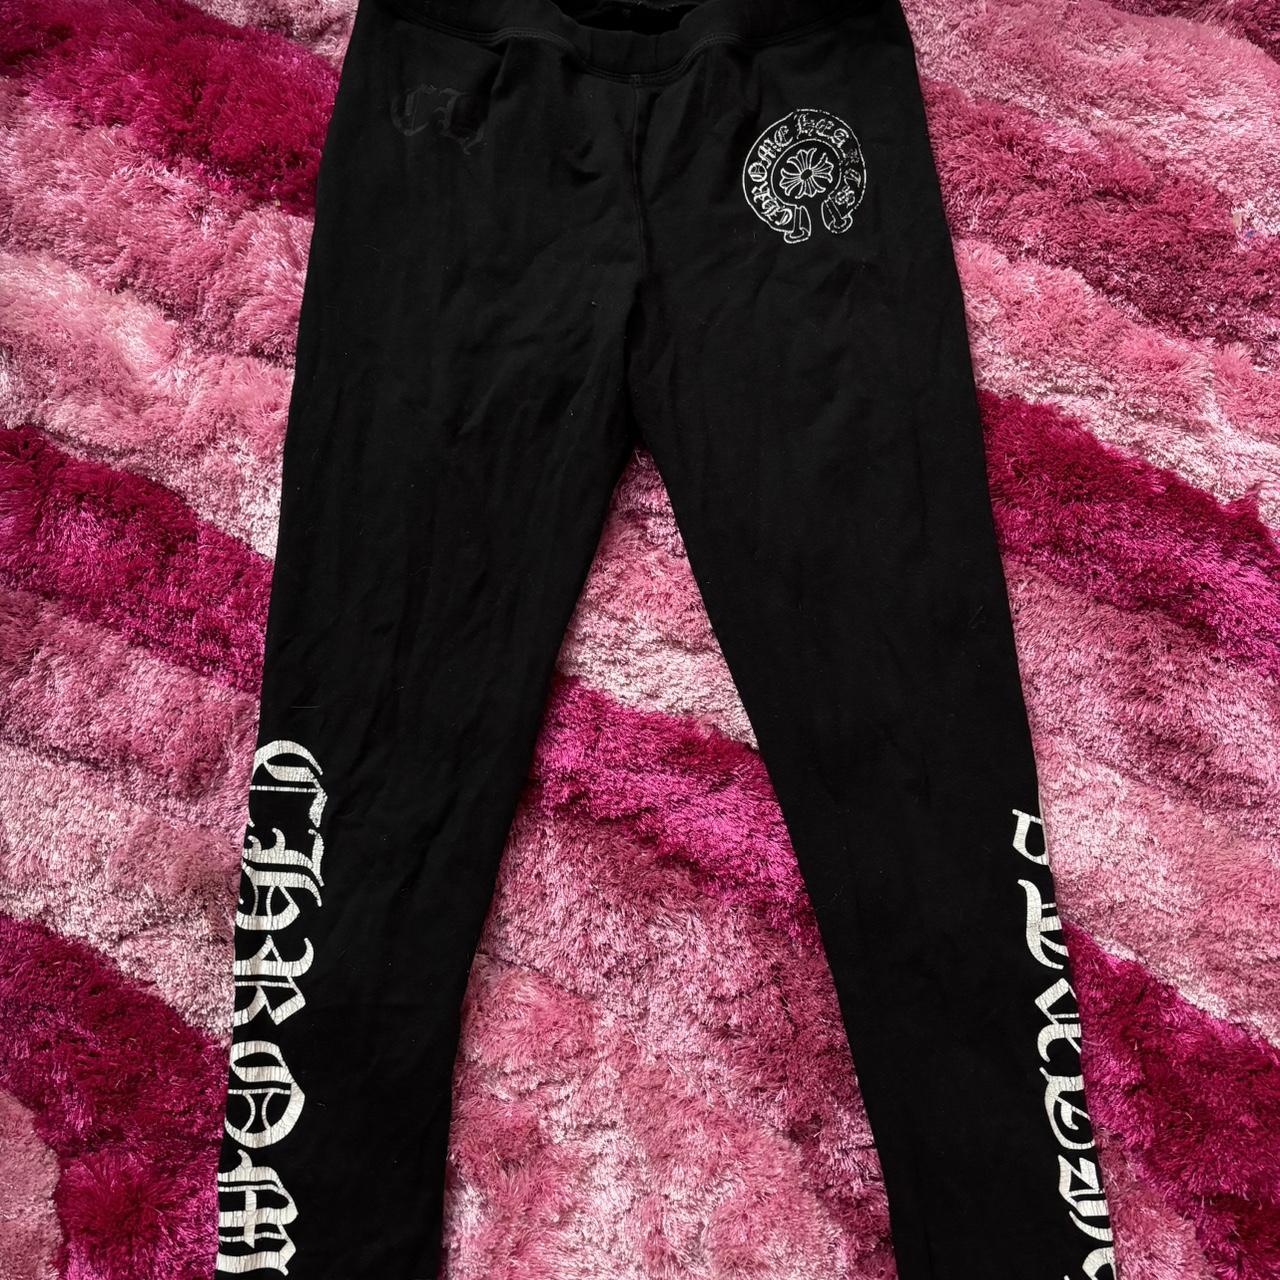 Chrome Hearts Leggings, Limited Edition. These Are - Depop